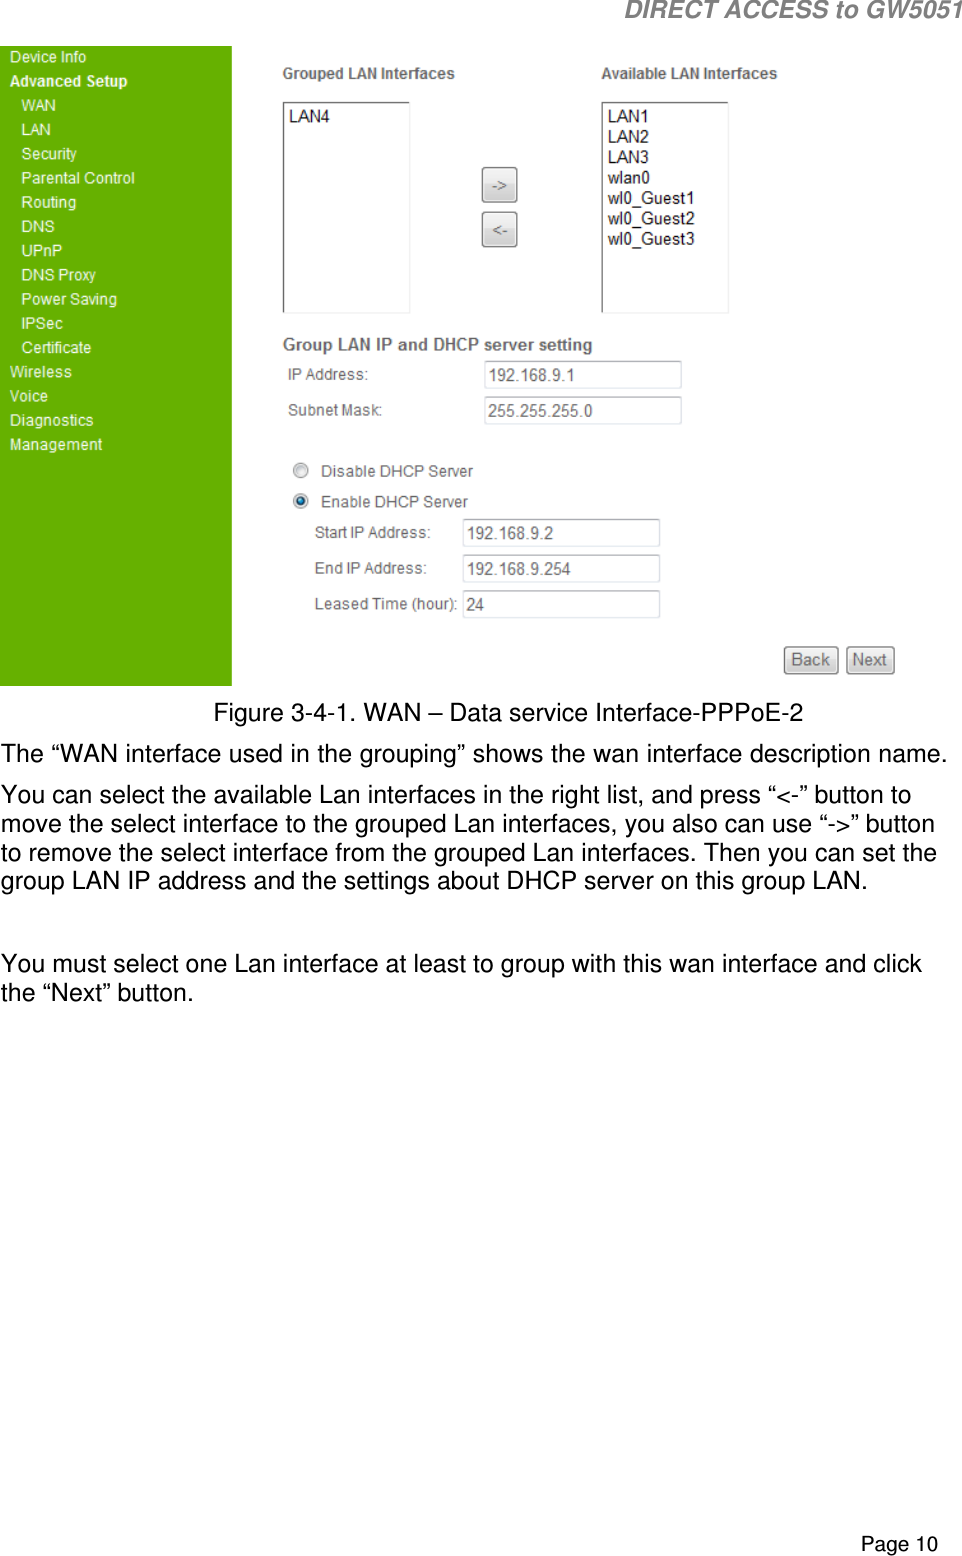                                                                                                                                                                                                                           DIRECT ACCESS to GW5051    Page 10  Figure 3-4-1. WAN – Data service Interface-PPPoE-2 The “WAN interface used in the grouping” shows the wan interface description name. You can select the available Lan interfaces in the right list, and press “&lt;-” button to move the select interface to the grouped Lan interfaces, you also can use “-&gt;” button to remove the select interface from the grouped Lan interfaces. Then you can set the group LAN IP address and the settings about DHCP server on this group LAN.  You must select one Lan interface at least to group with this wan interface and click the “Next” button. 